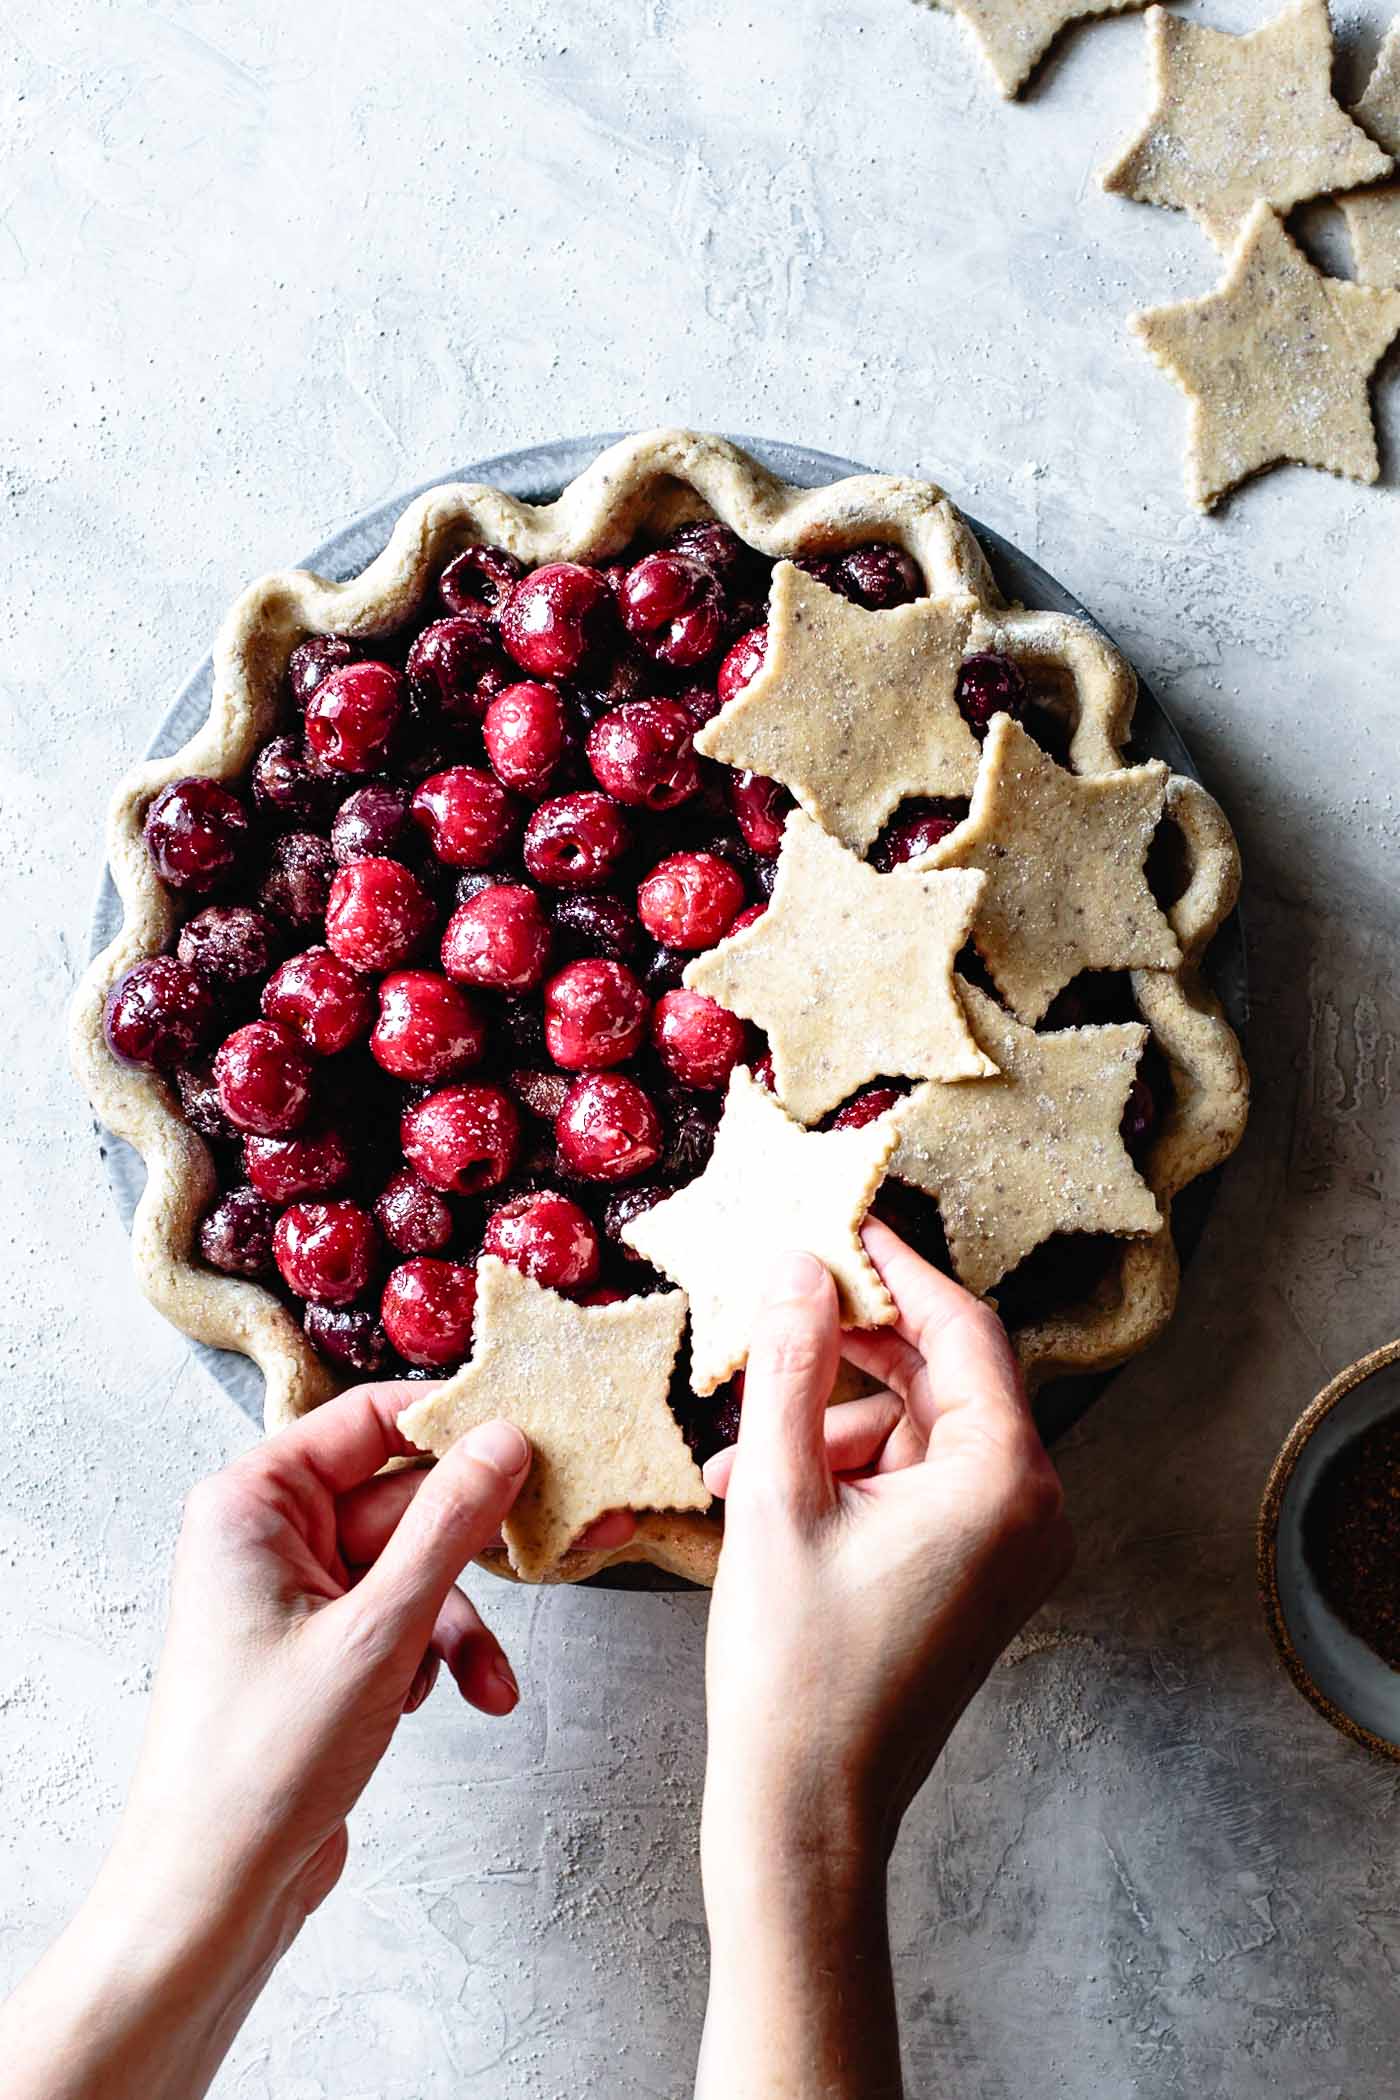 hands are placing star-shaped dough cut-outs over the cherries